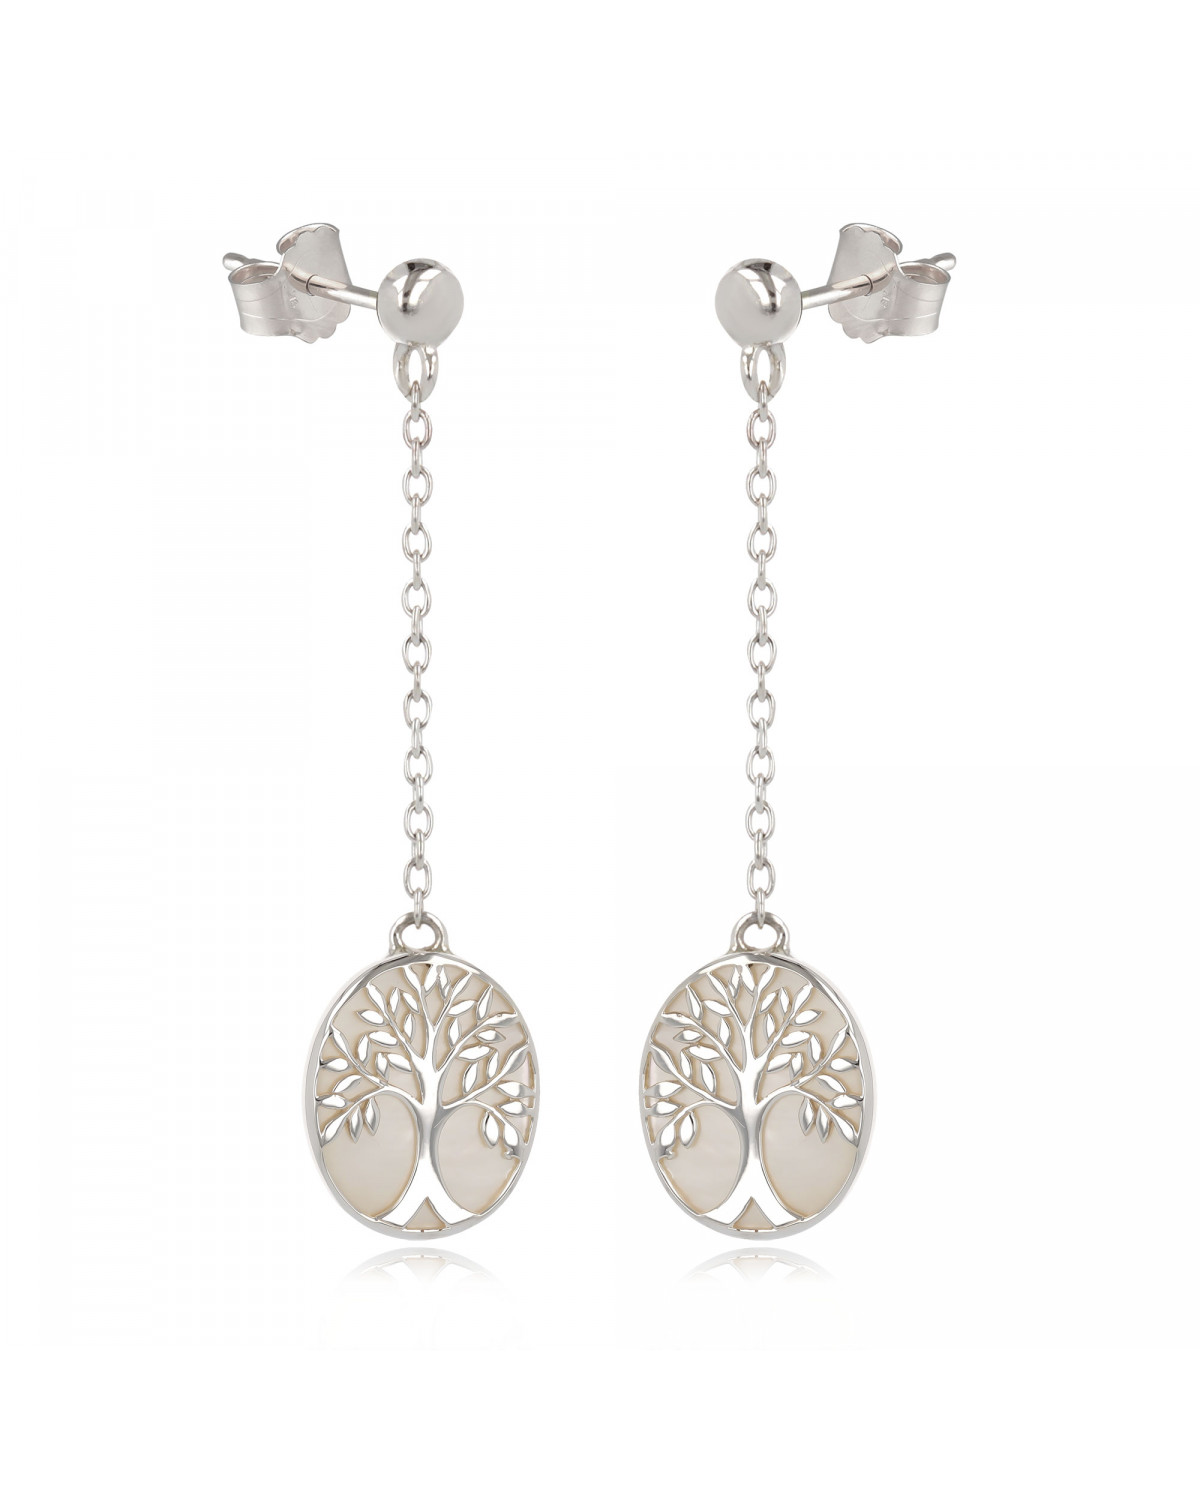 gift idea for women-Gift Jewelry Symbol Tree of Life-Earrings - white mother of pearl Sterling Silver-Oval-Woman